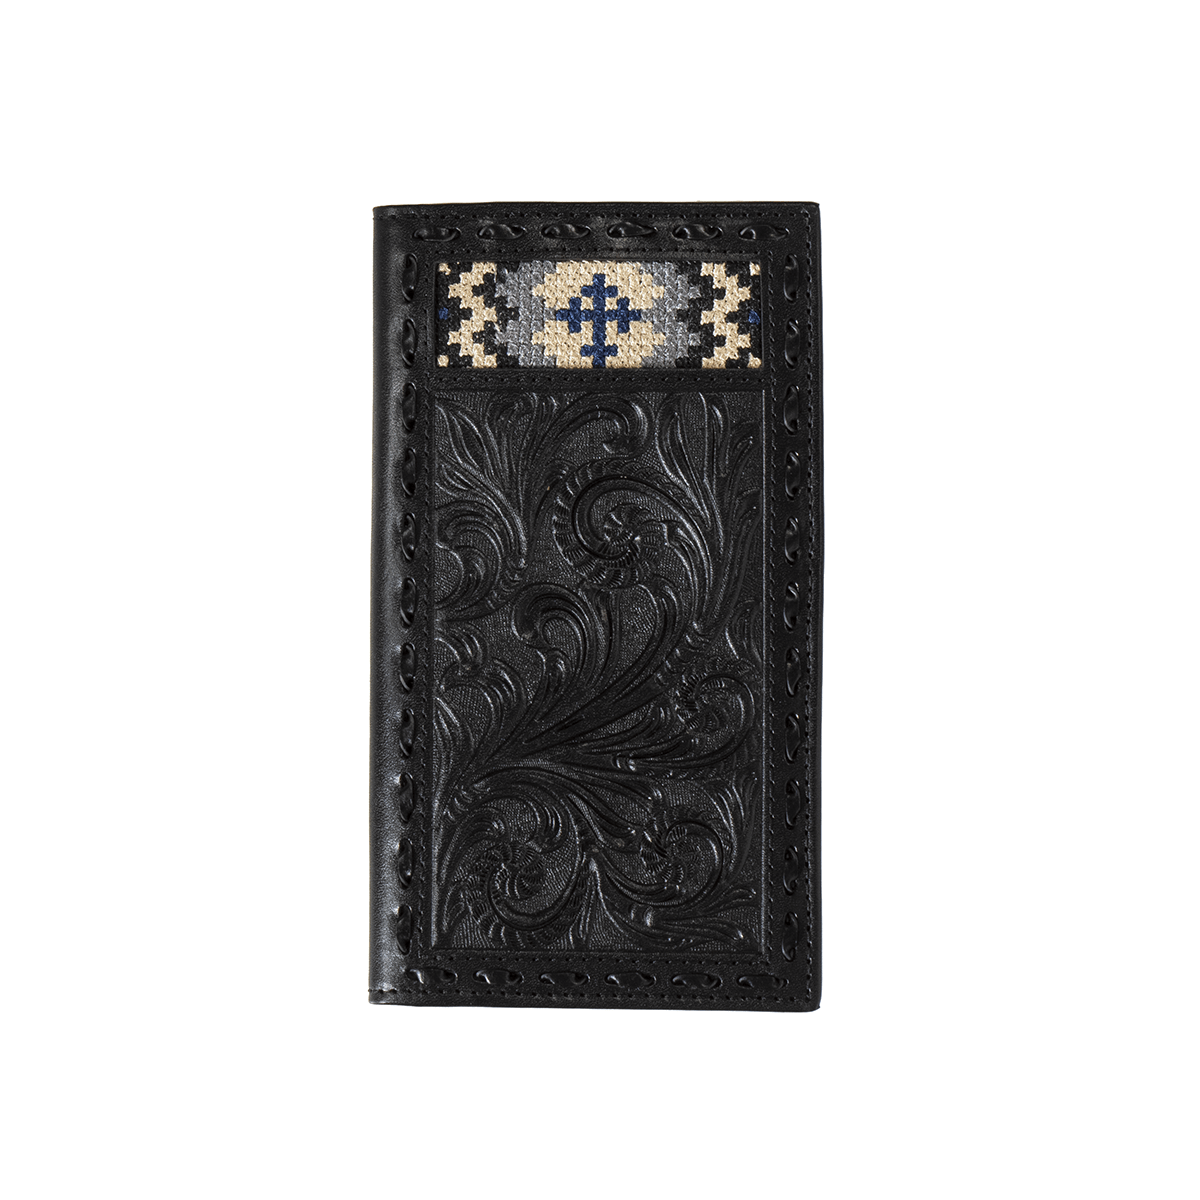 3D RODEO WALLET FLORAL LEATHER CROSS EMBROIDERED BLACK